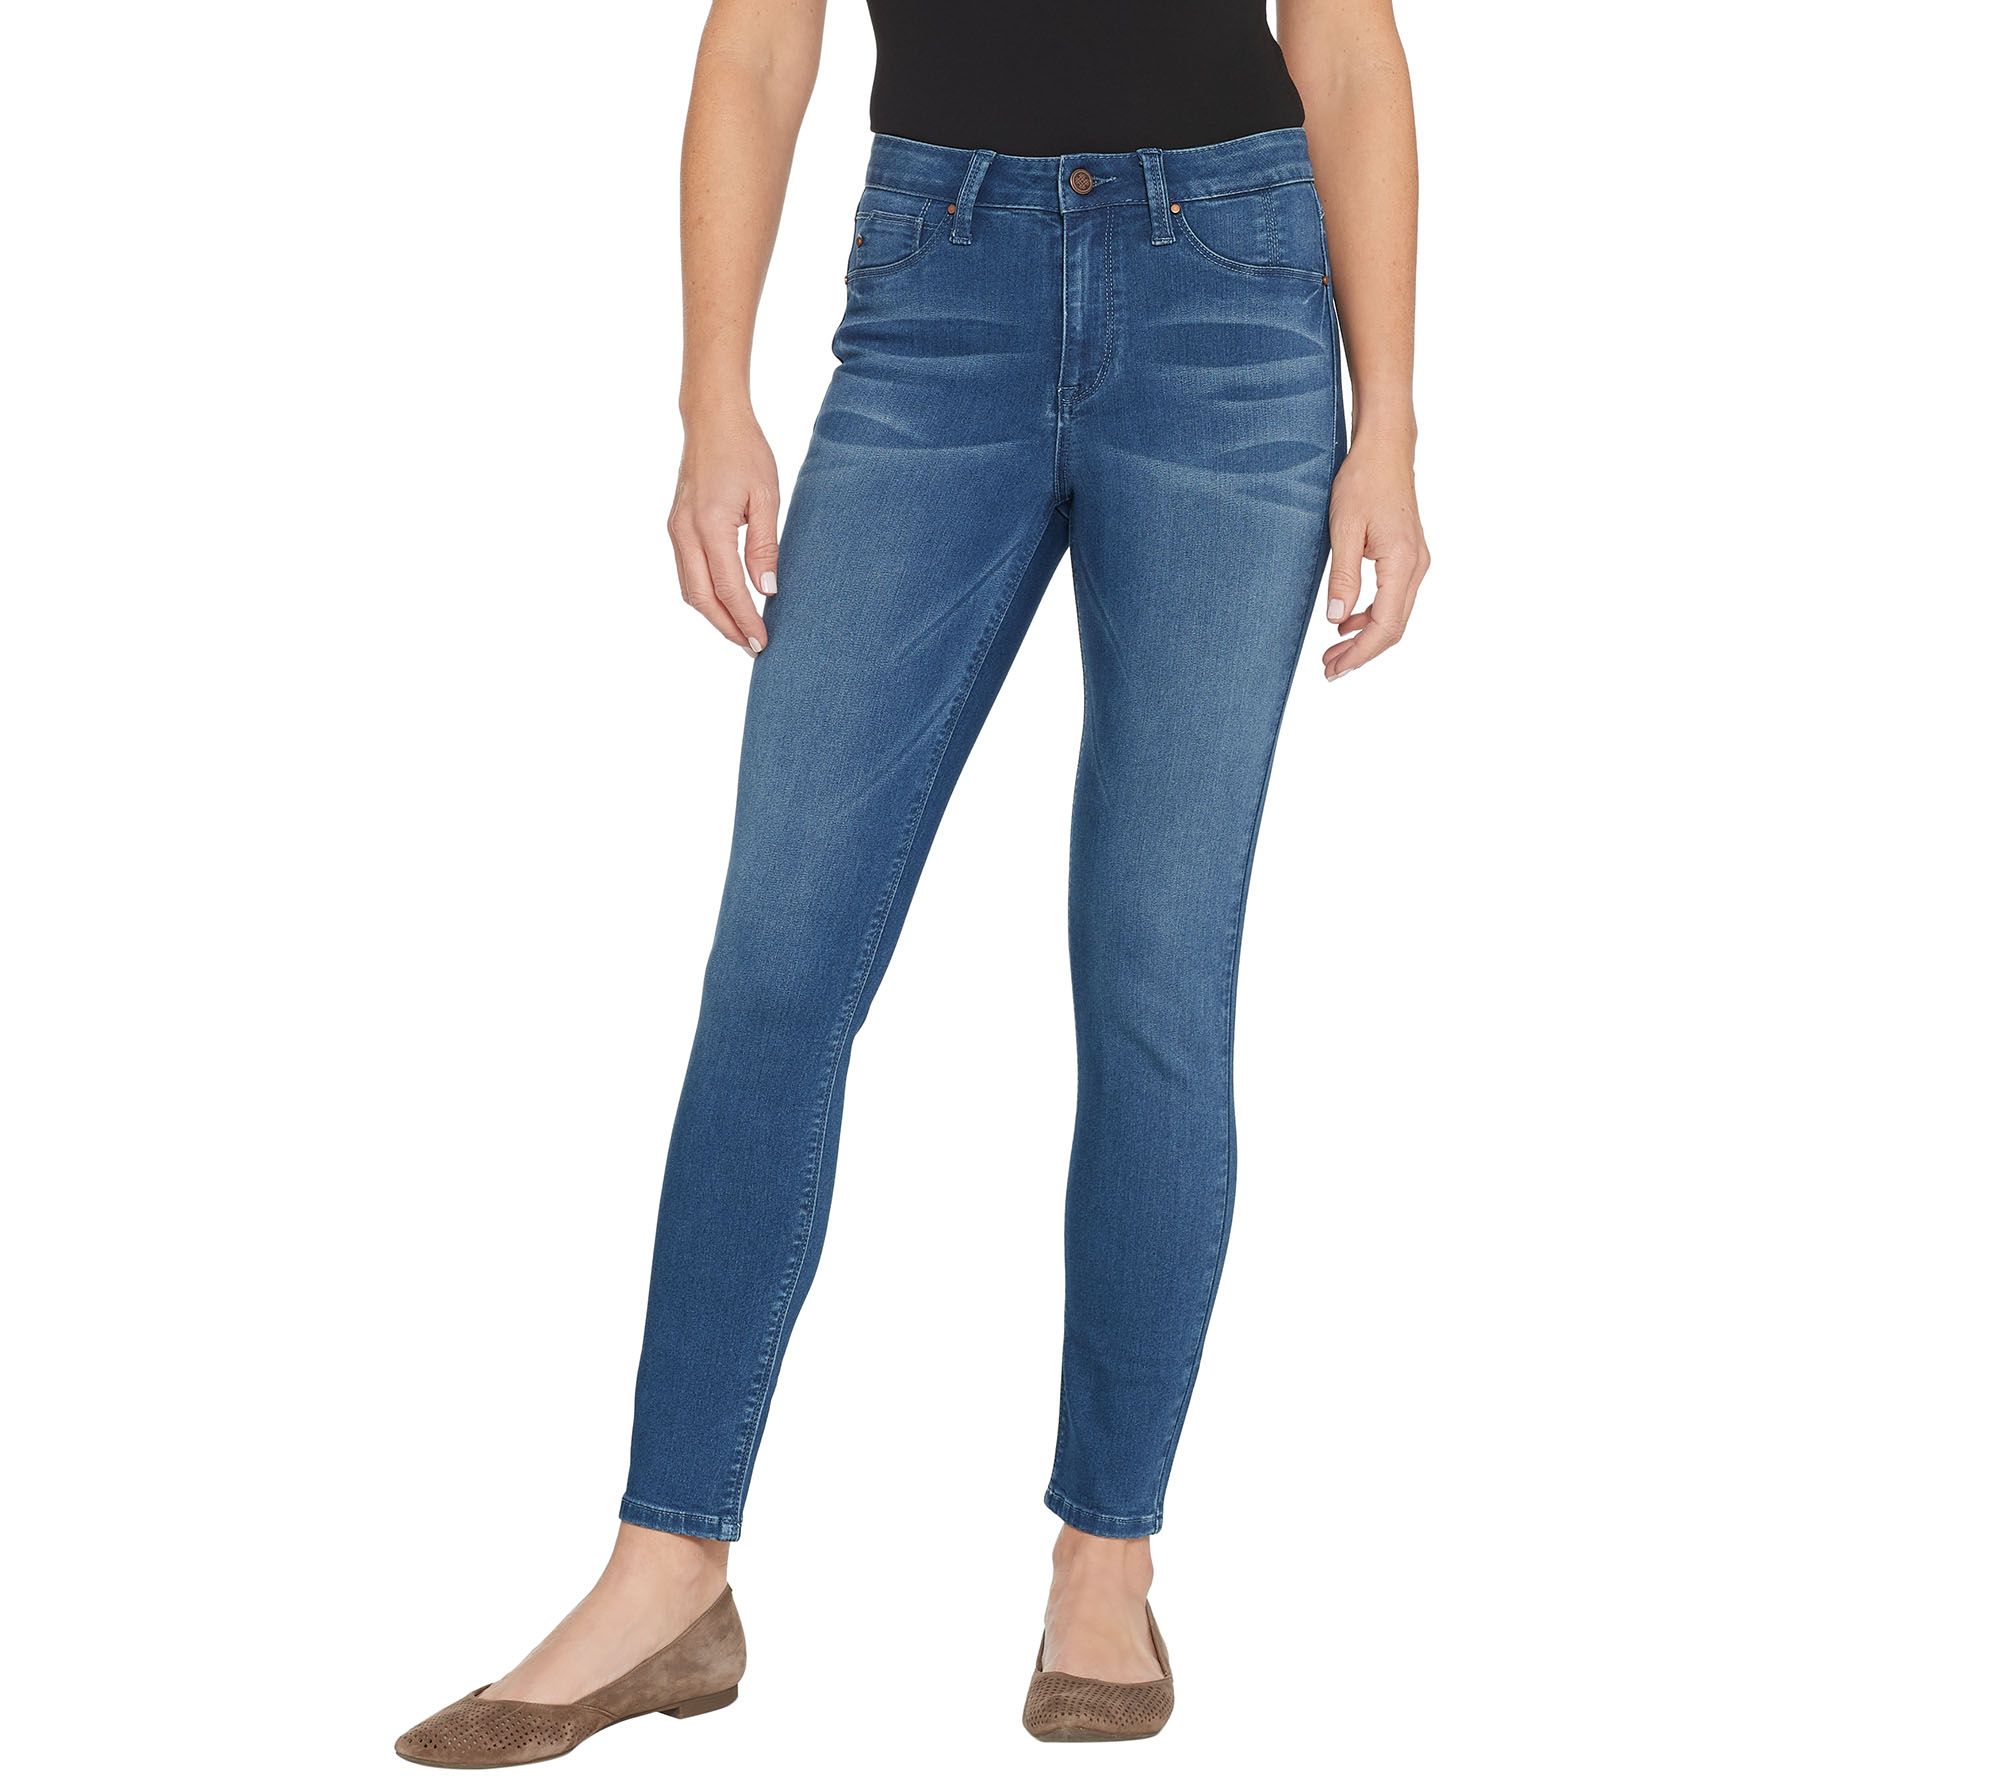 Laurie Felt Silky Denim Ankle Skinny Jeans with Zipper Fly - QVC.com